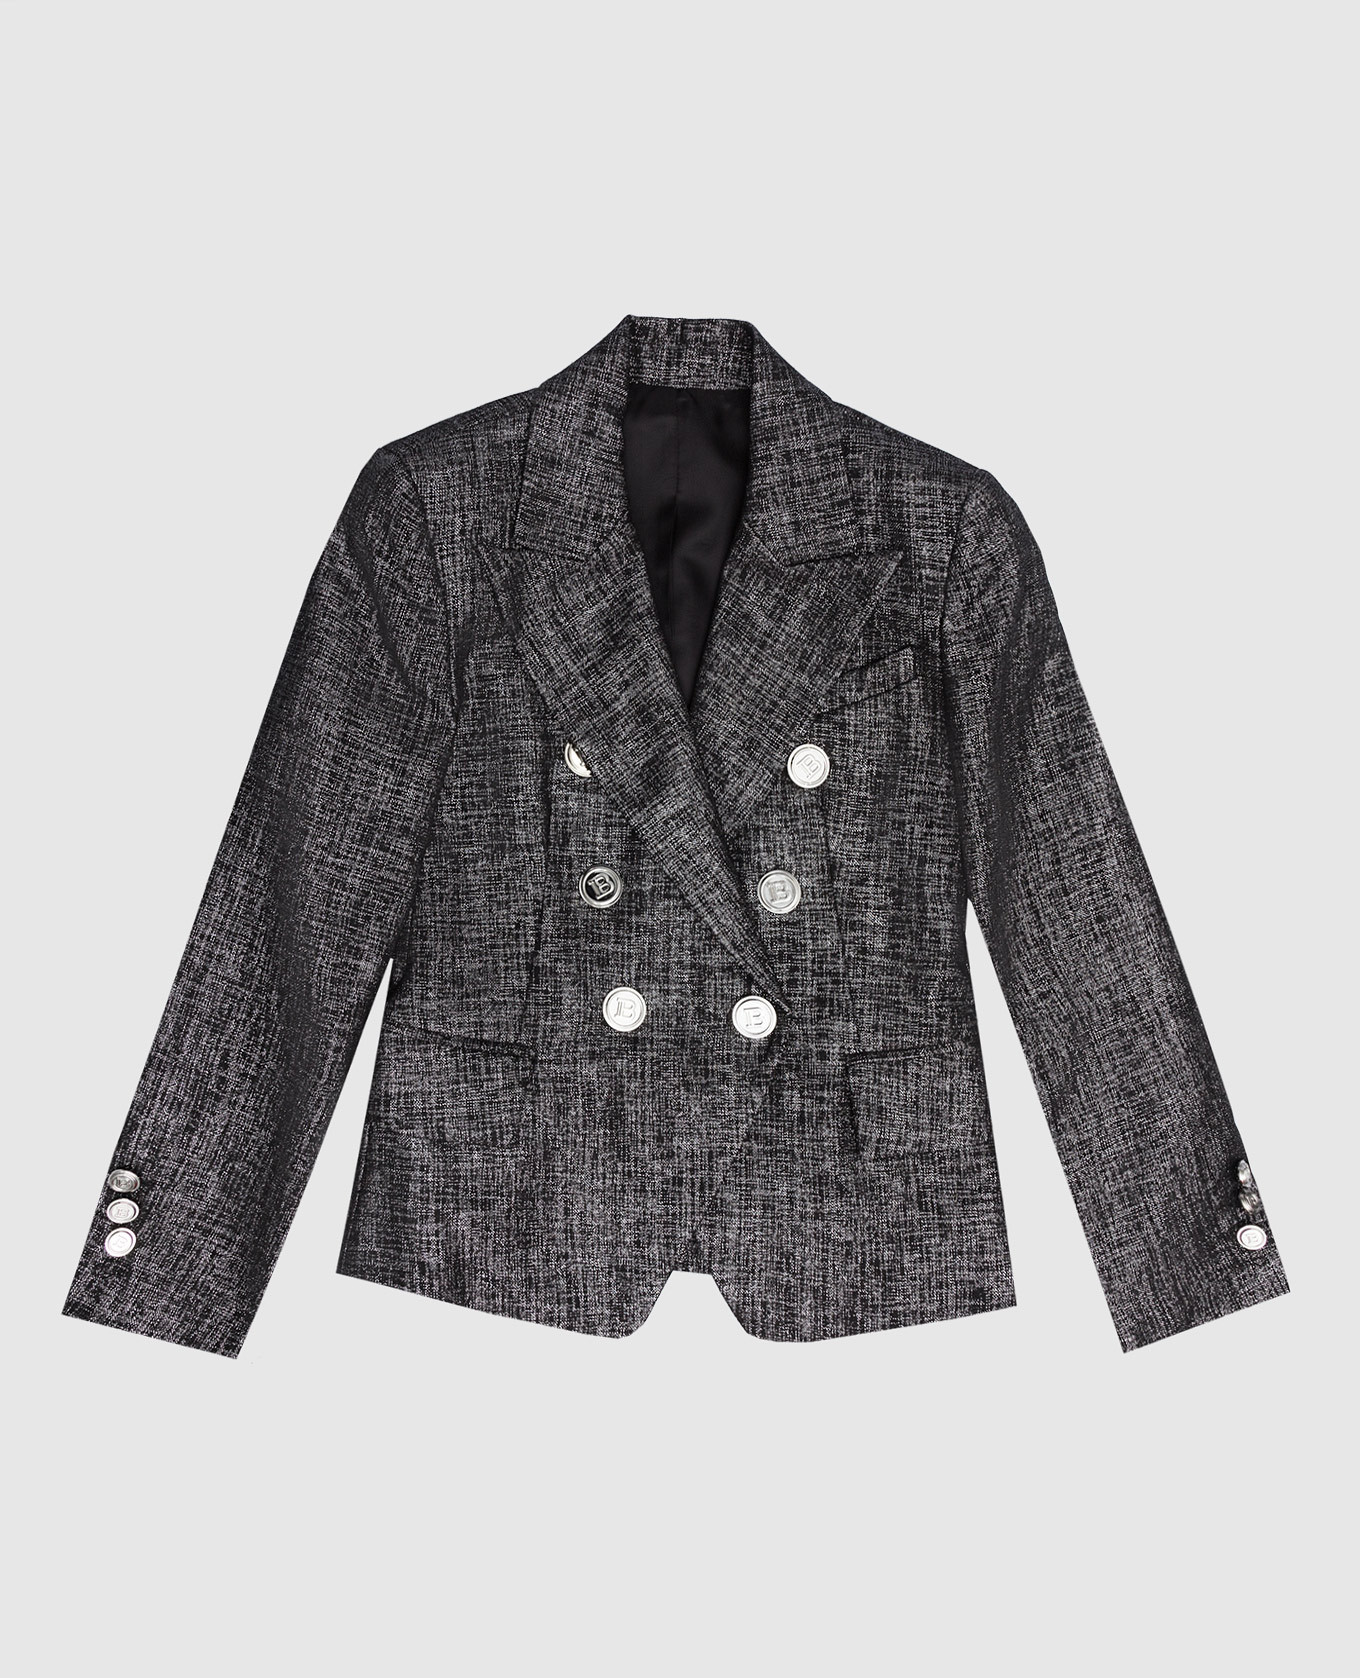 Children's black double-breasted jacket with lurex